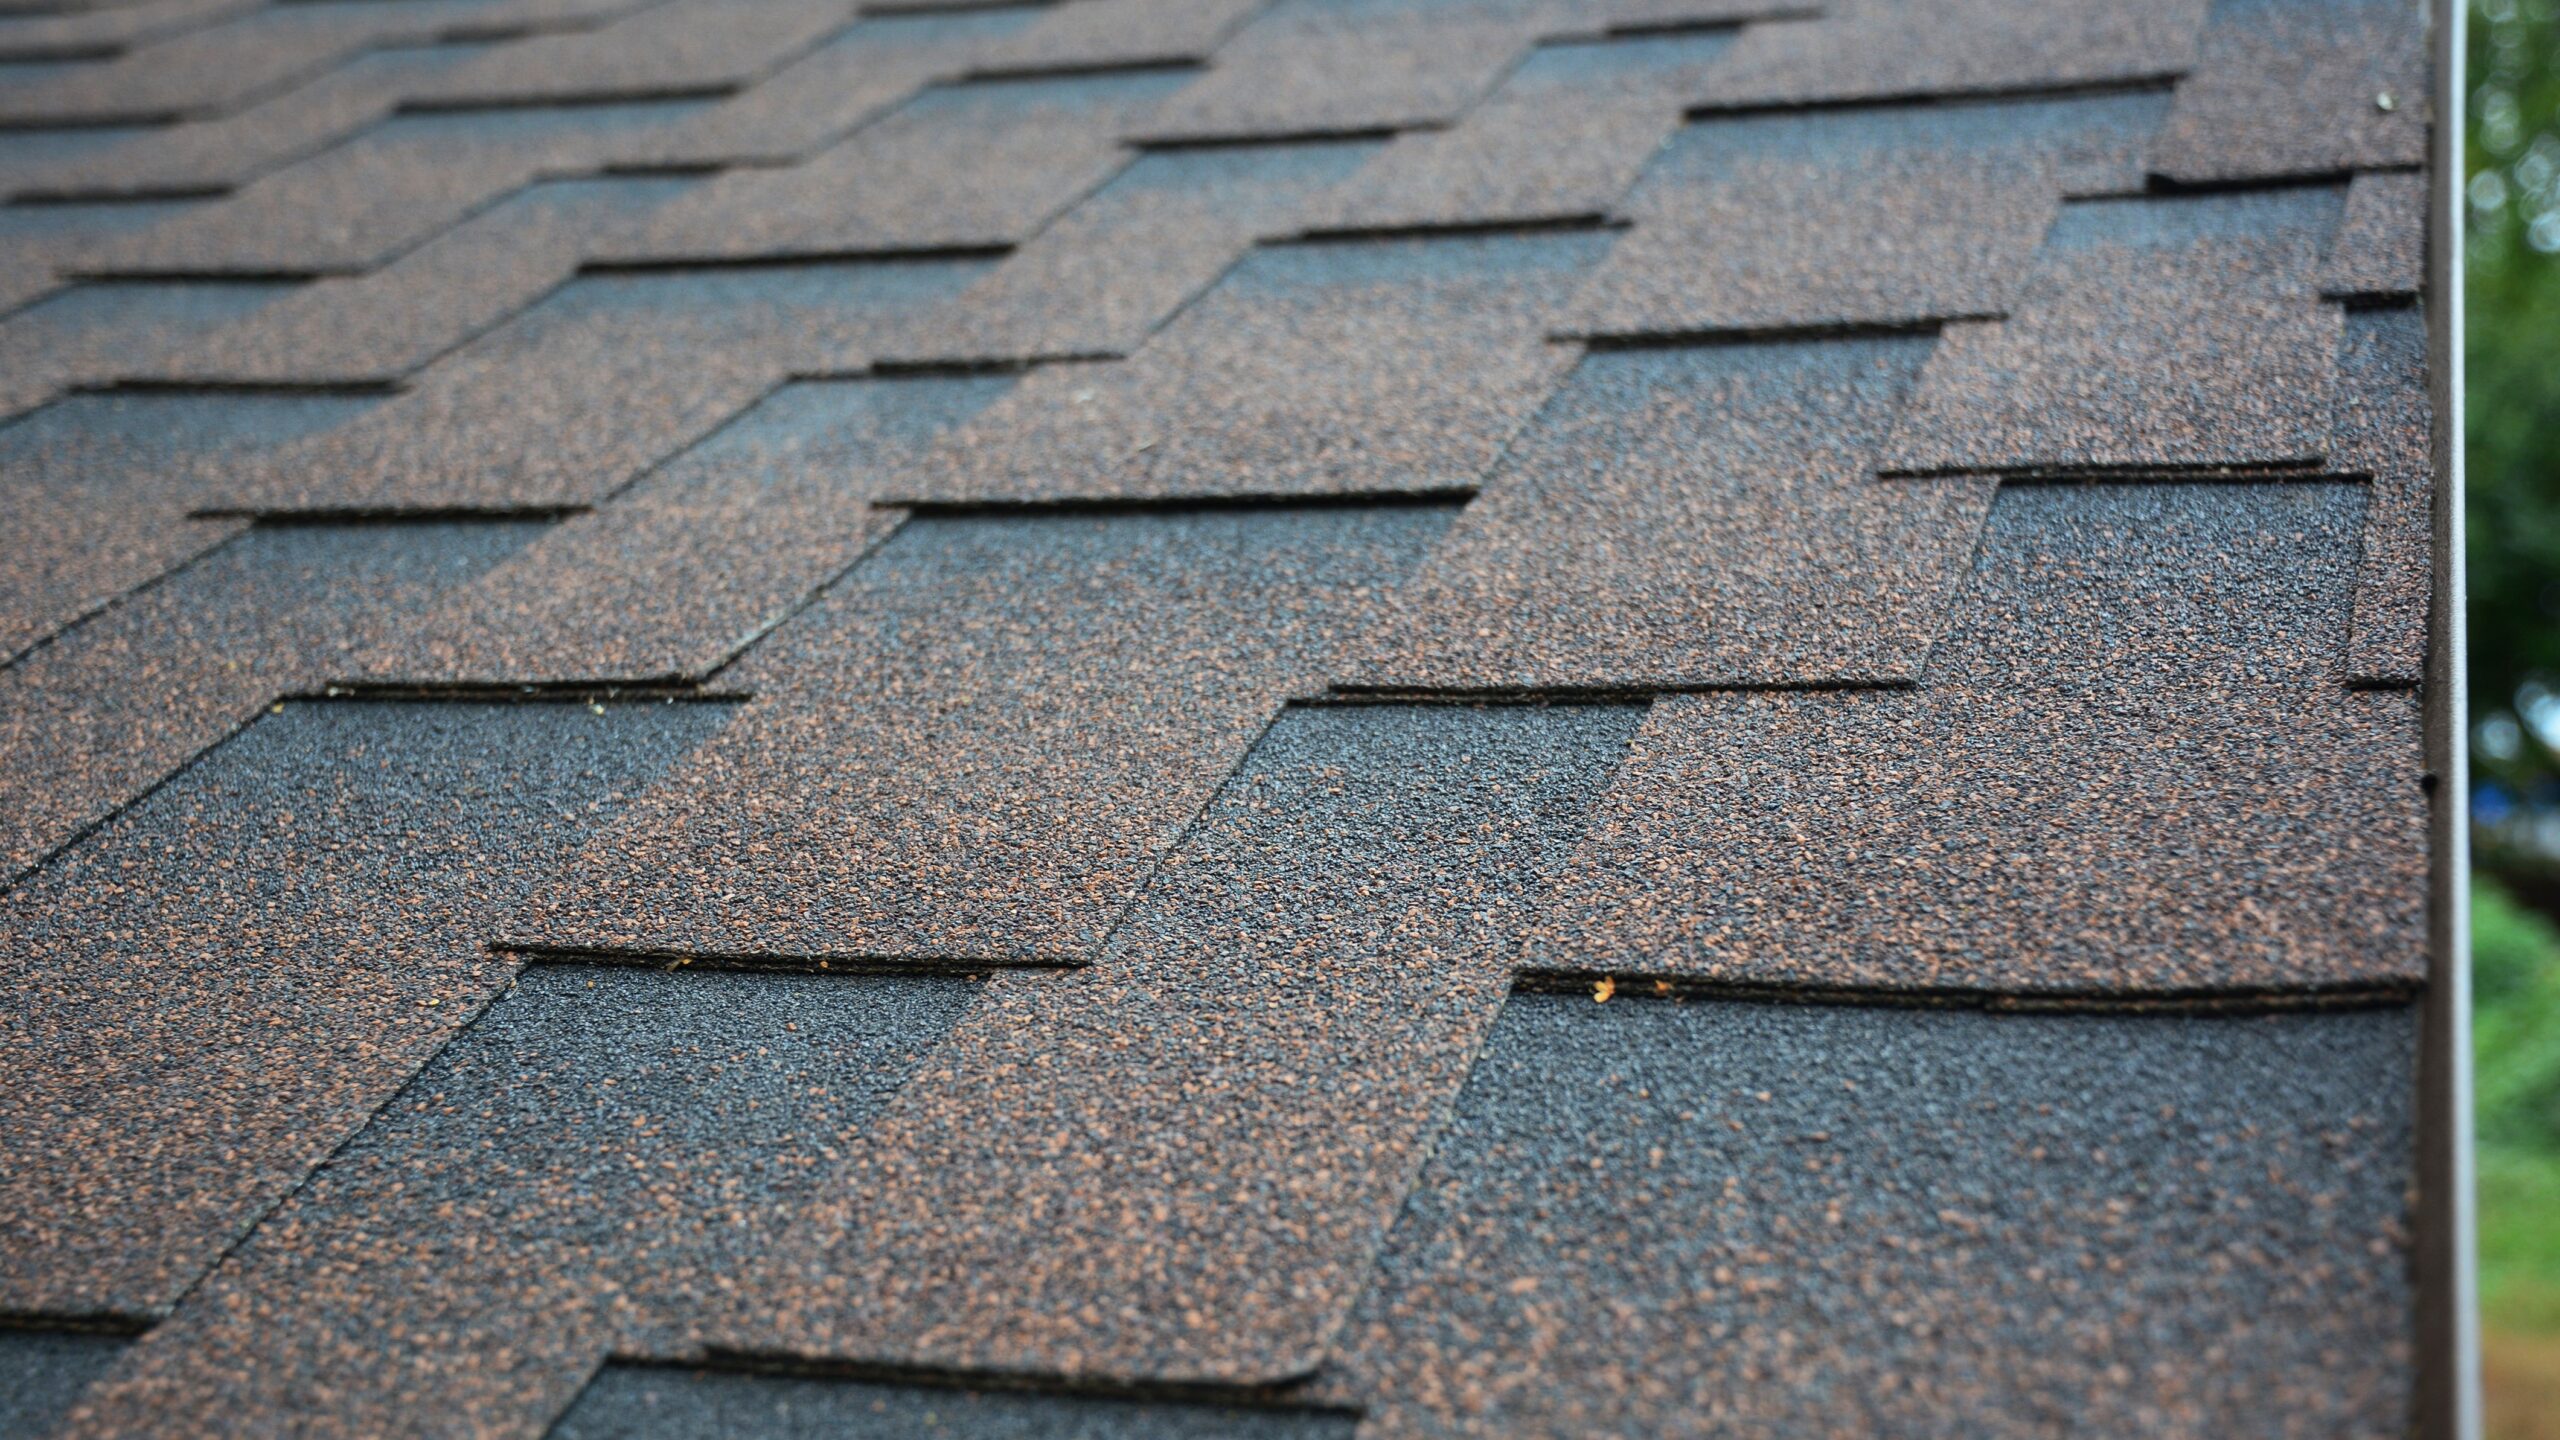 Architectural shingles installed on residential roof